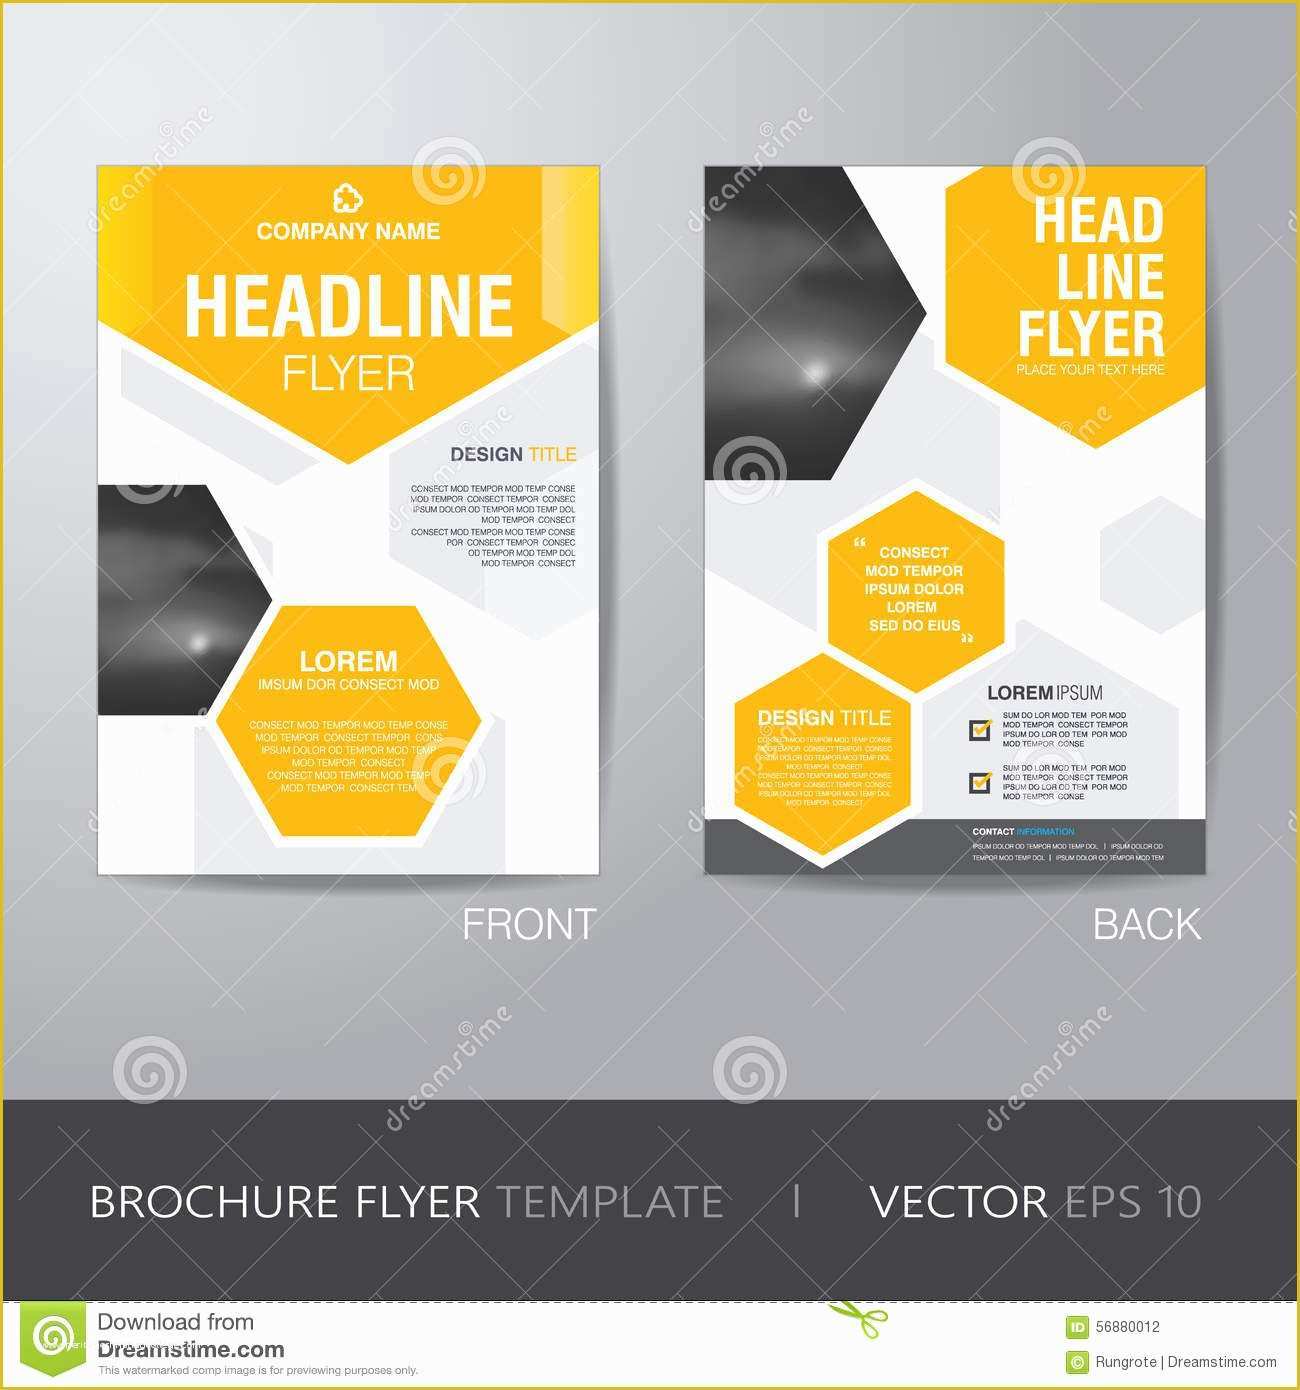 Free Advertising Flyer Design Templates Of Flyer Layout Templates Yourweek 4b5891eca25e